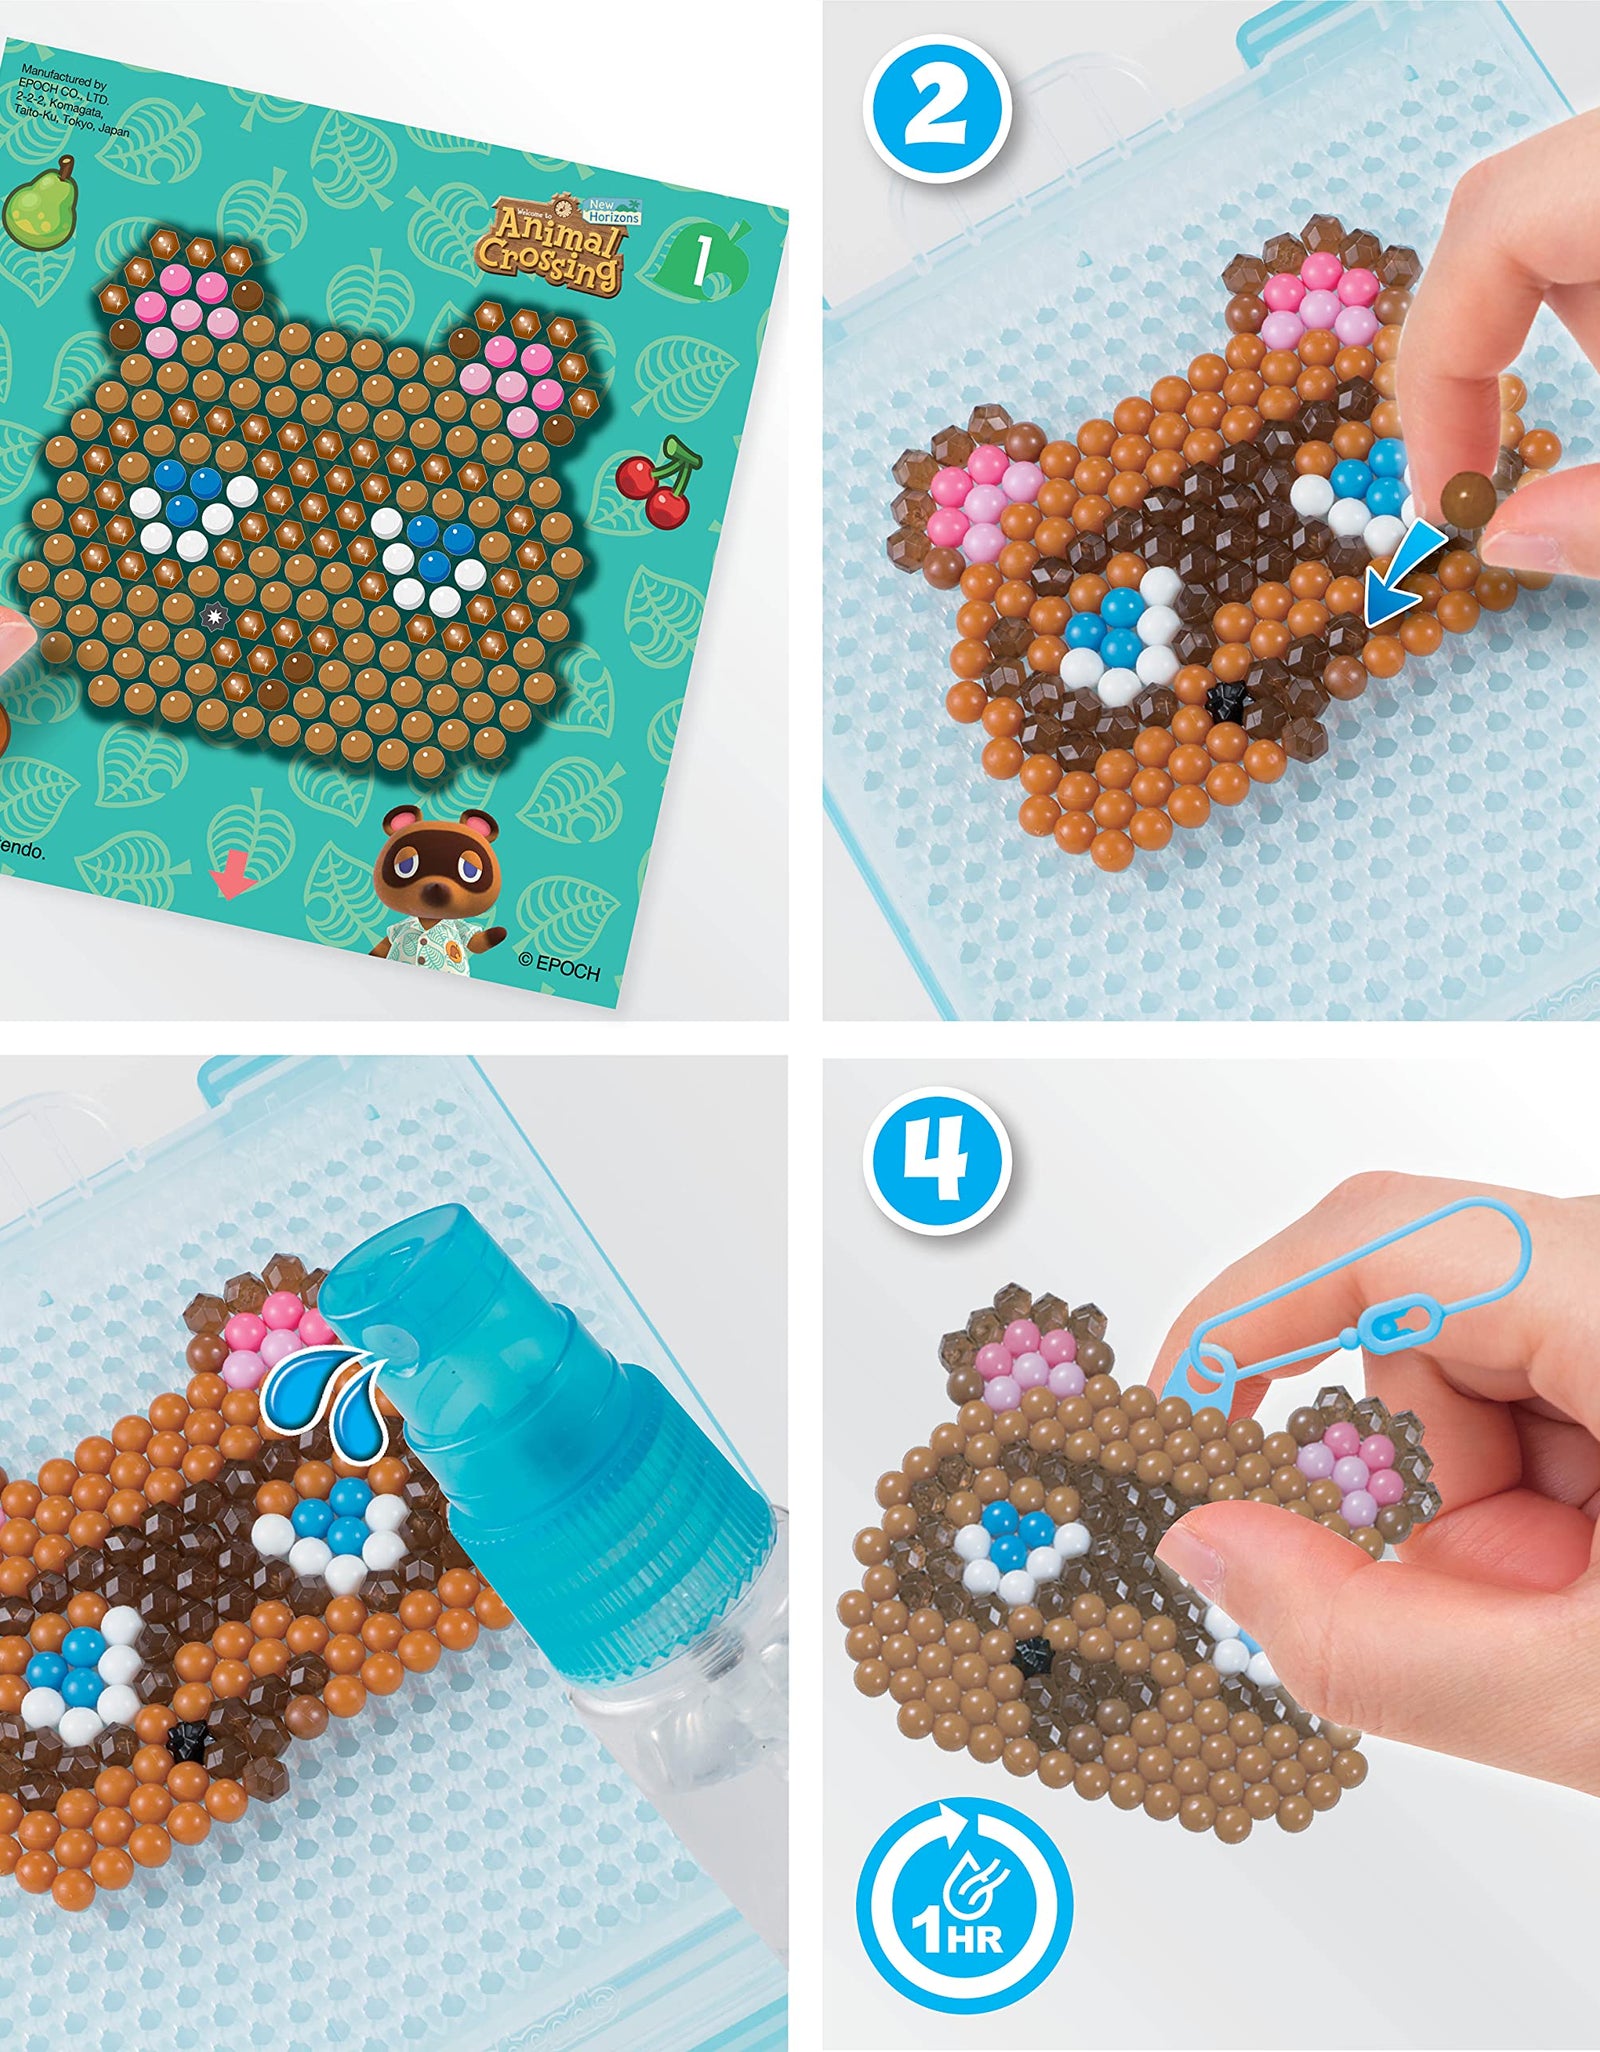 Aquabeads Animal Crossing : New Horizons Character Set, Kids Crafts, Beads, Arts and Crafts, Complete Activity Kit for 4+